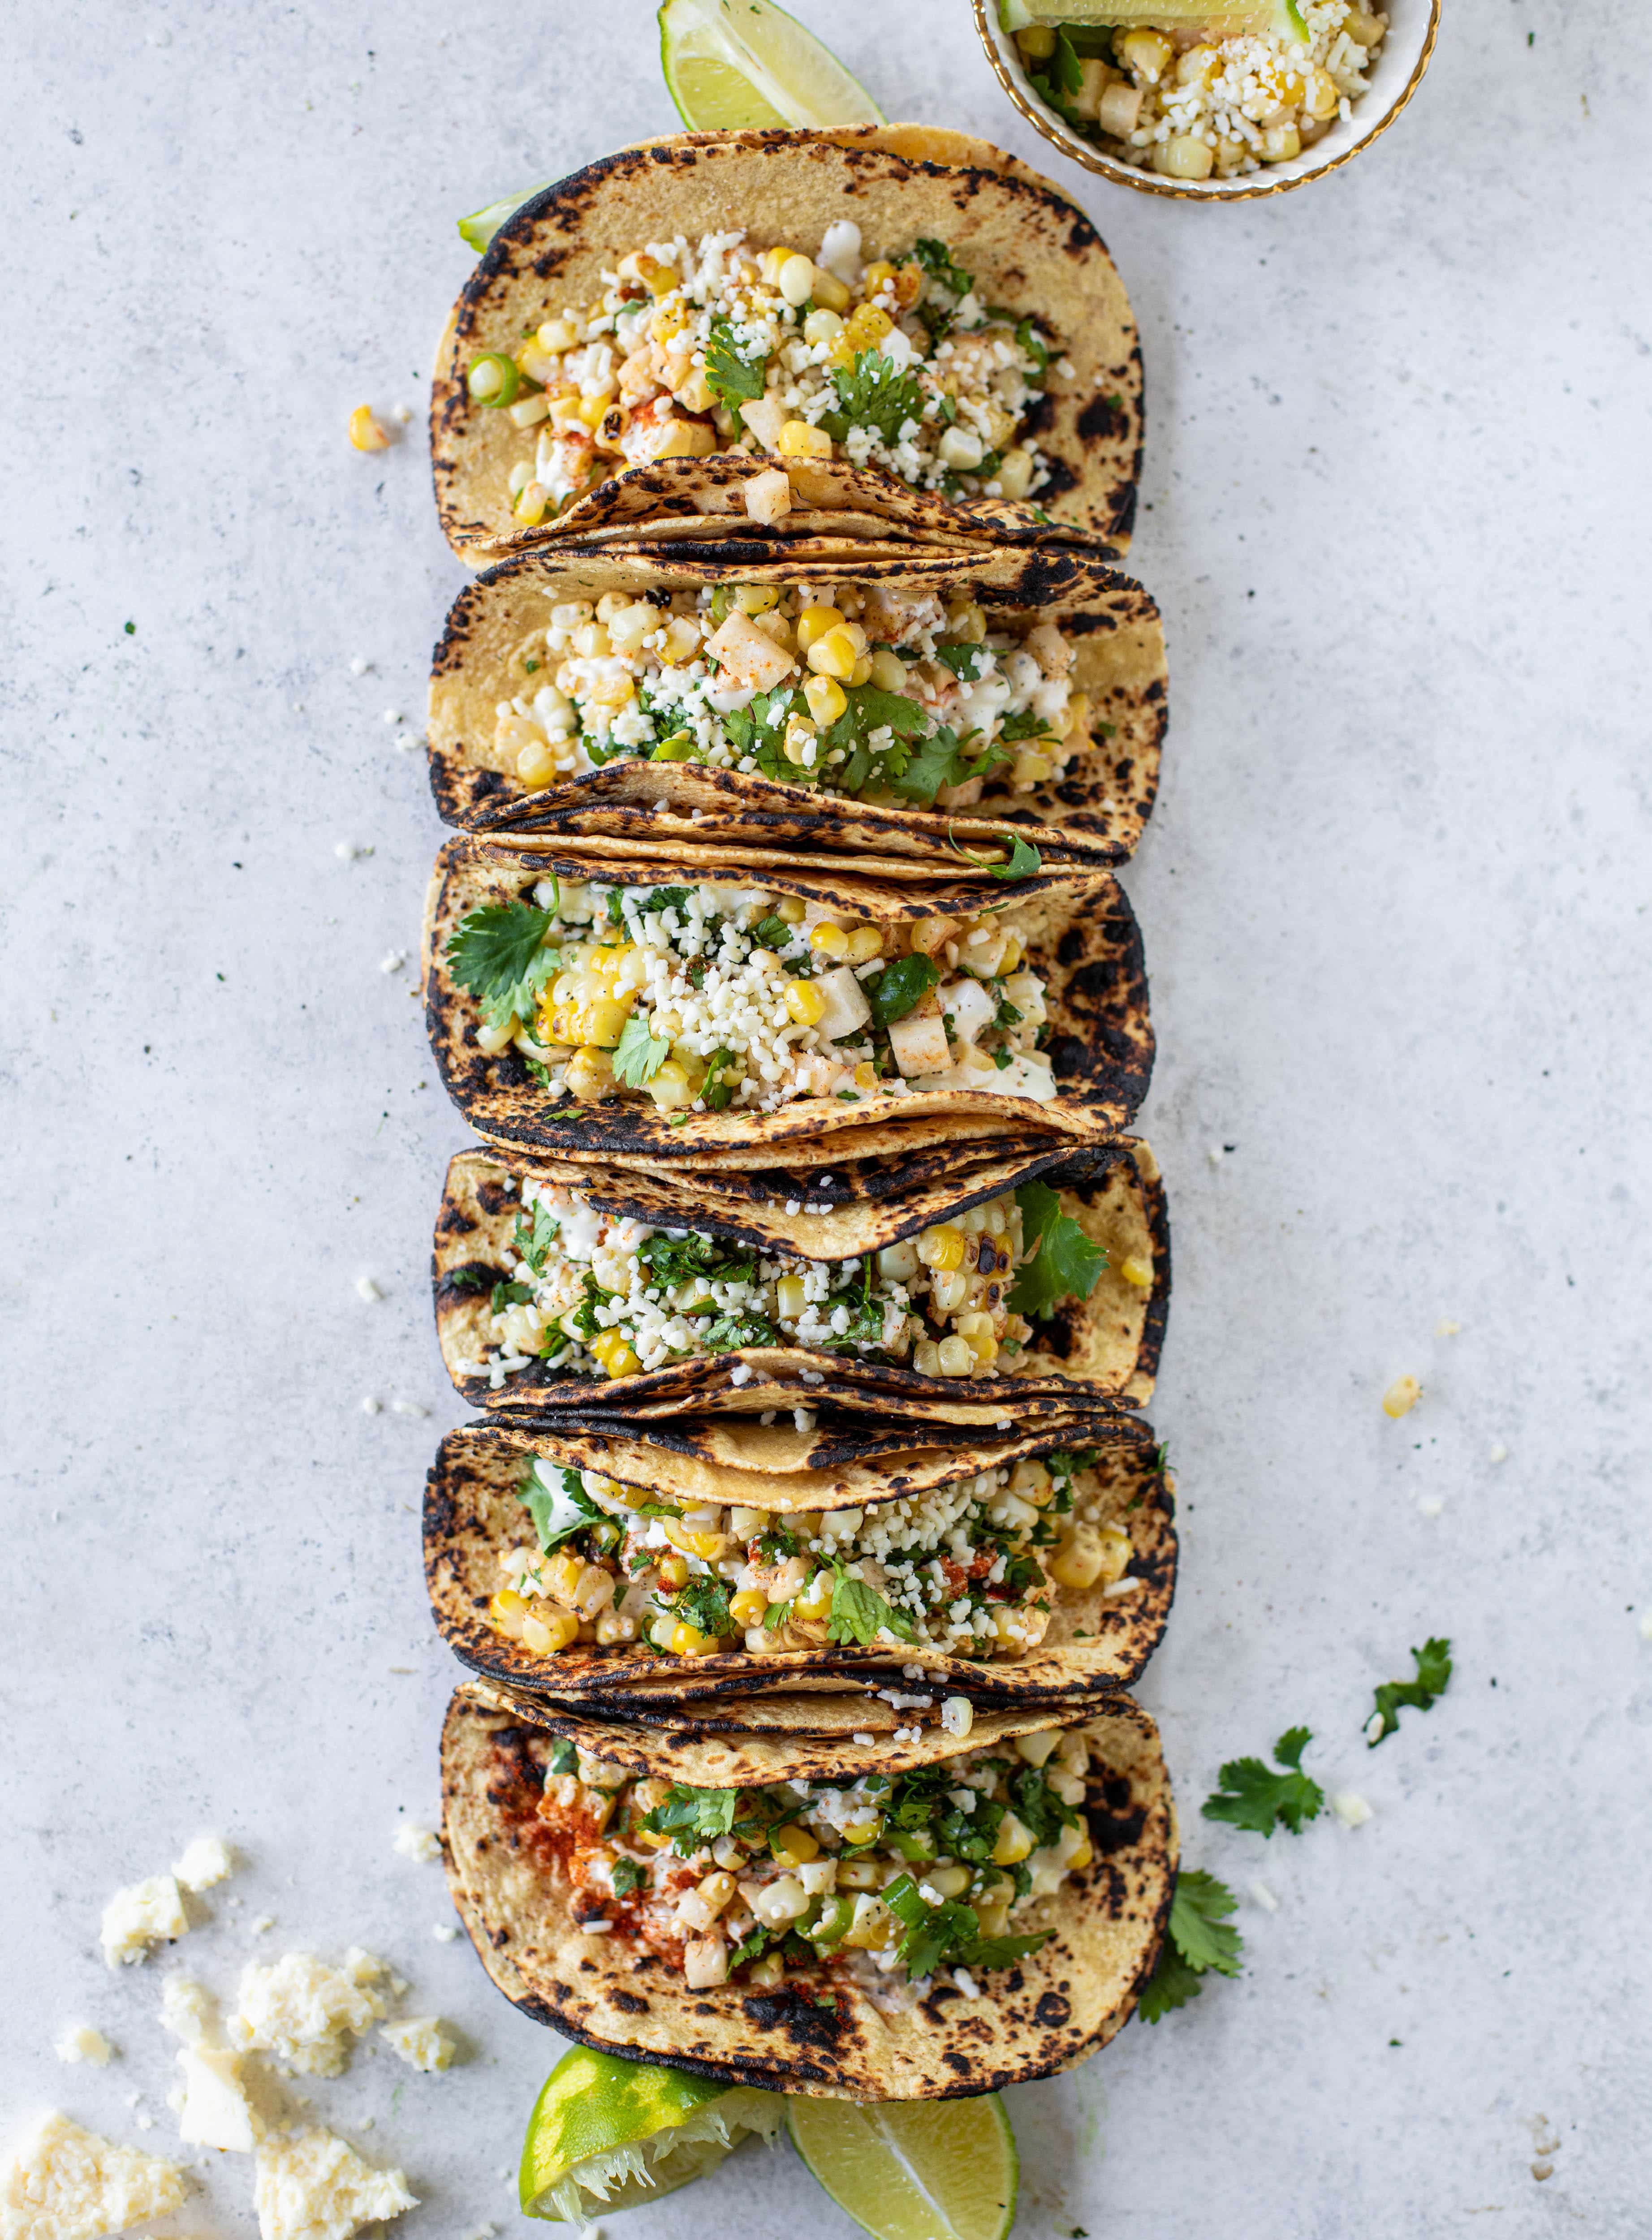 These street corn tacos are filled with a jicama corn salad and drizzled with garlic mayo. This little taco packs a major flavor punch.